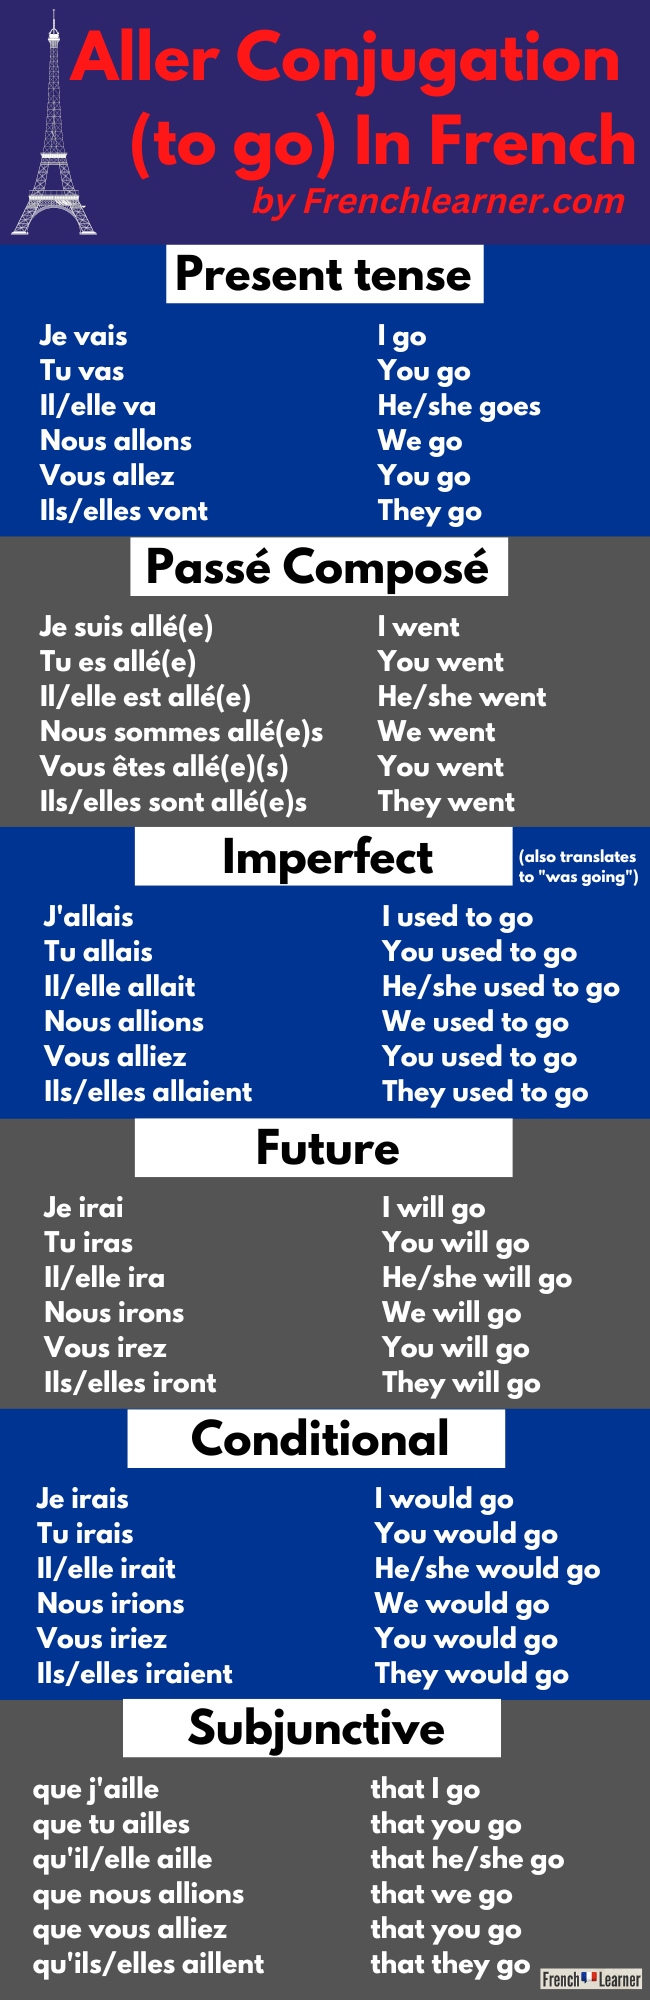 Etre Conjugation Imparfait Aller Conjugation: How To Conjugate The Verb To Go In French